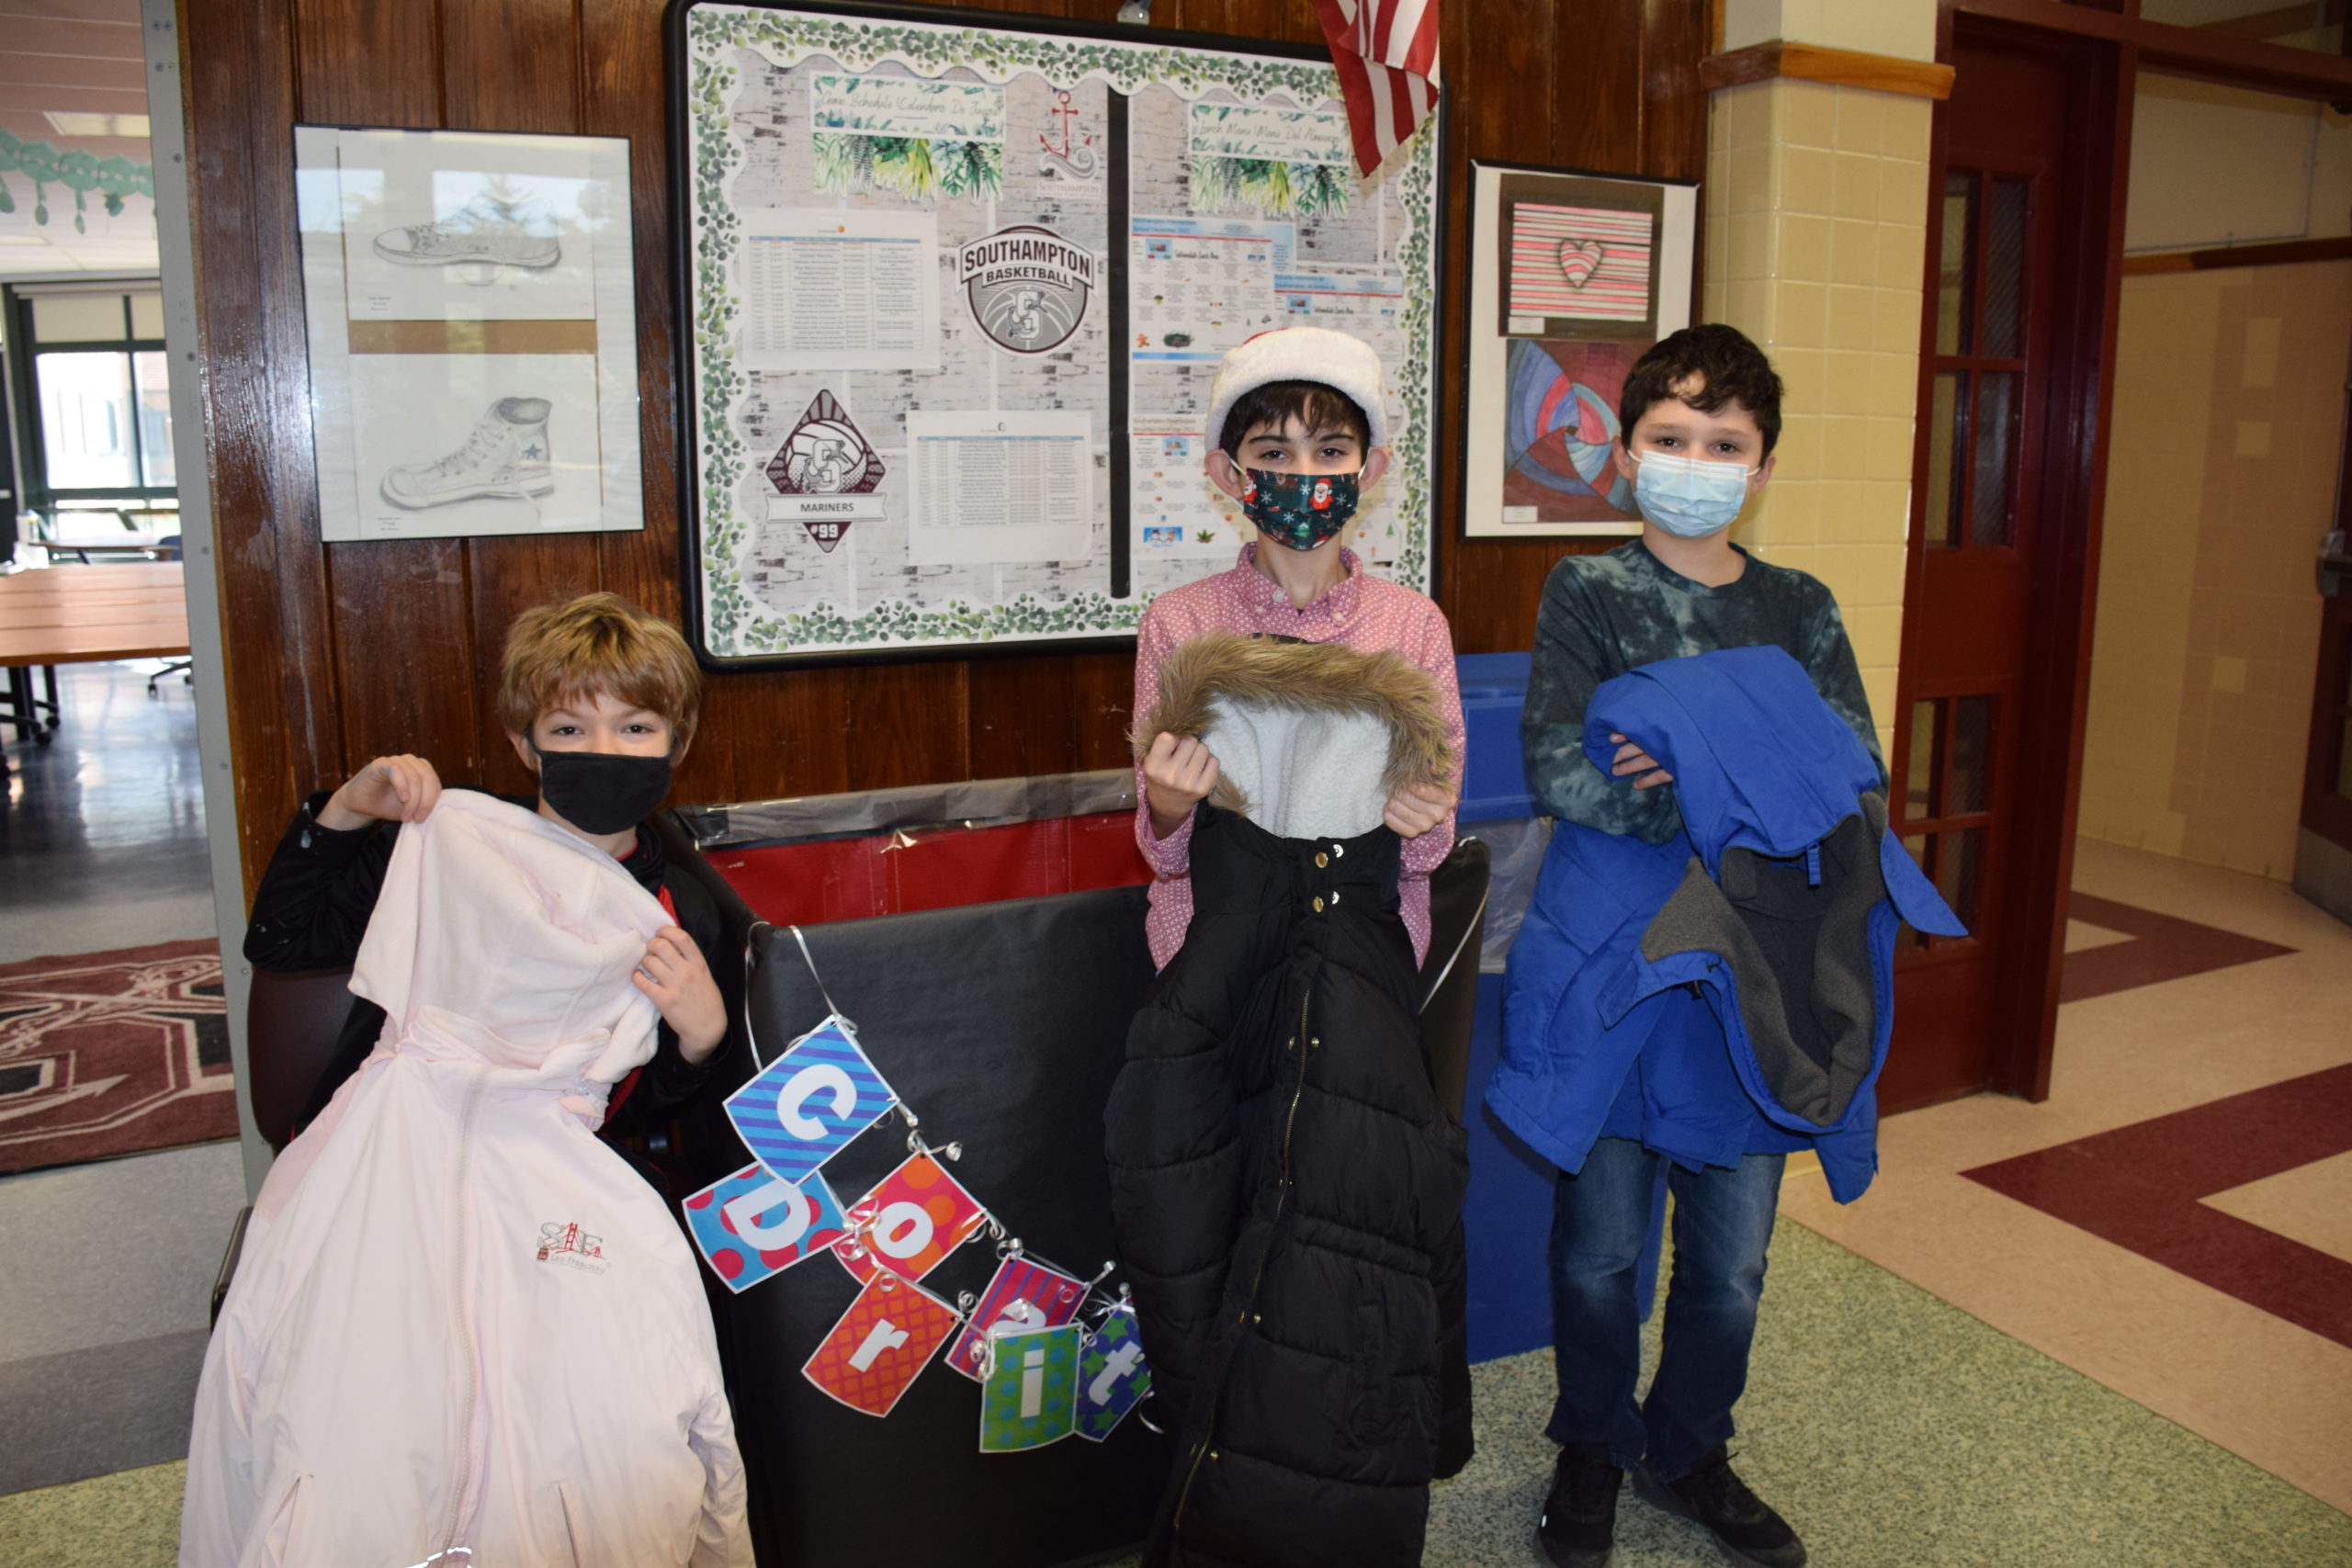 To do their part to give back to the community, members of the Southampton Intermediate School's  Early Act Service Club are collecting gently used coats. All of the coats collected will be donated to Heart of the Hamptons.